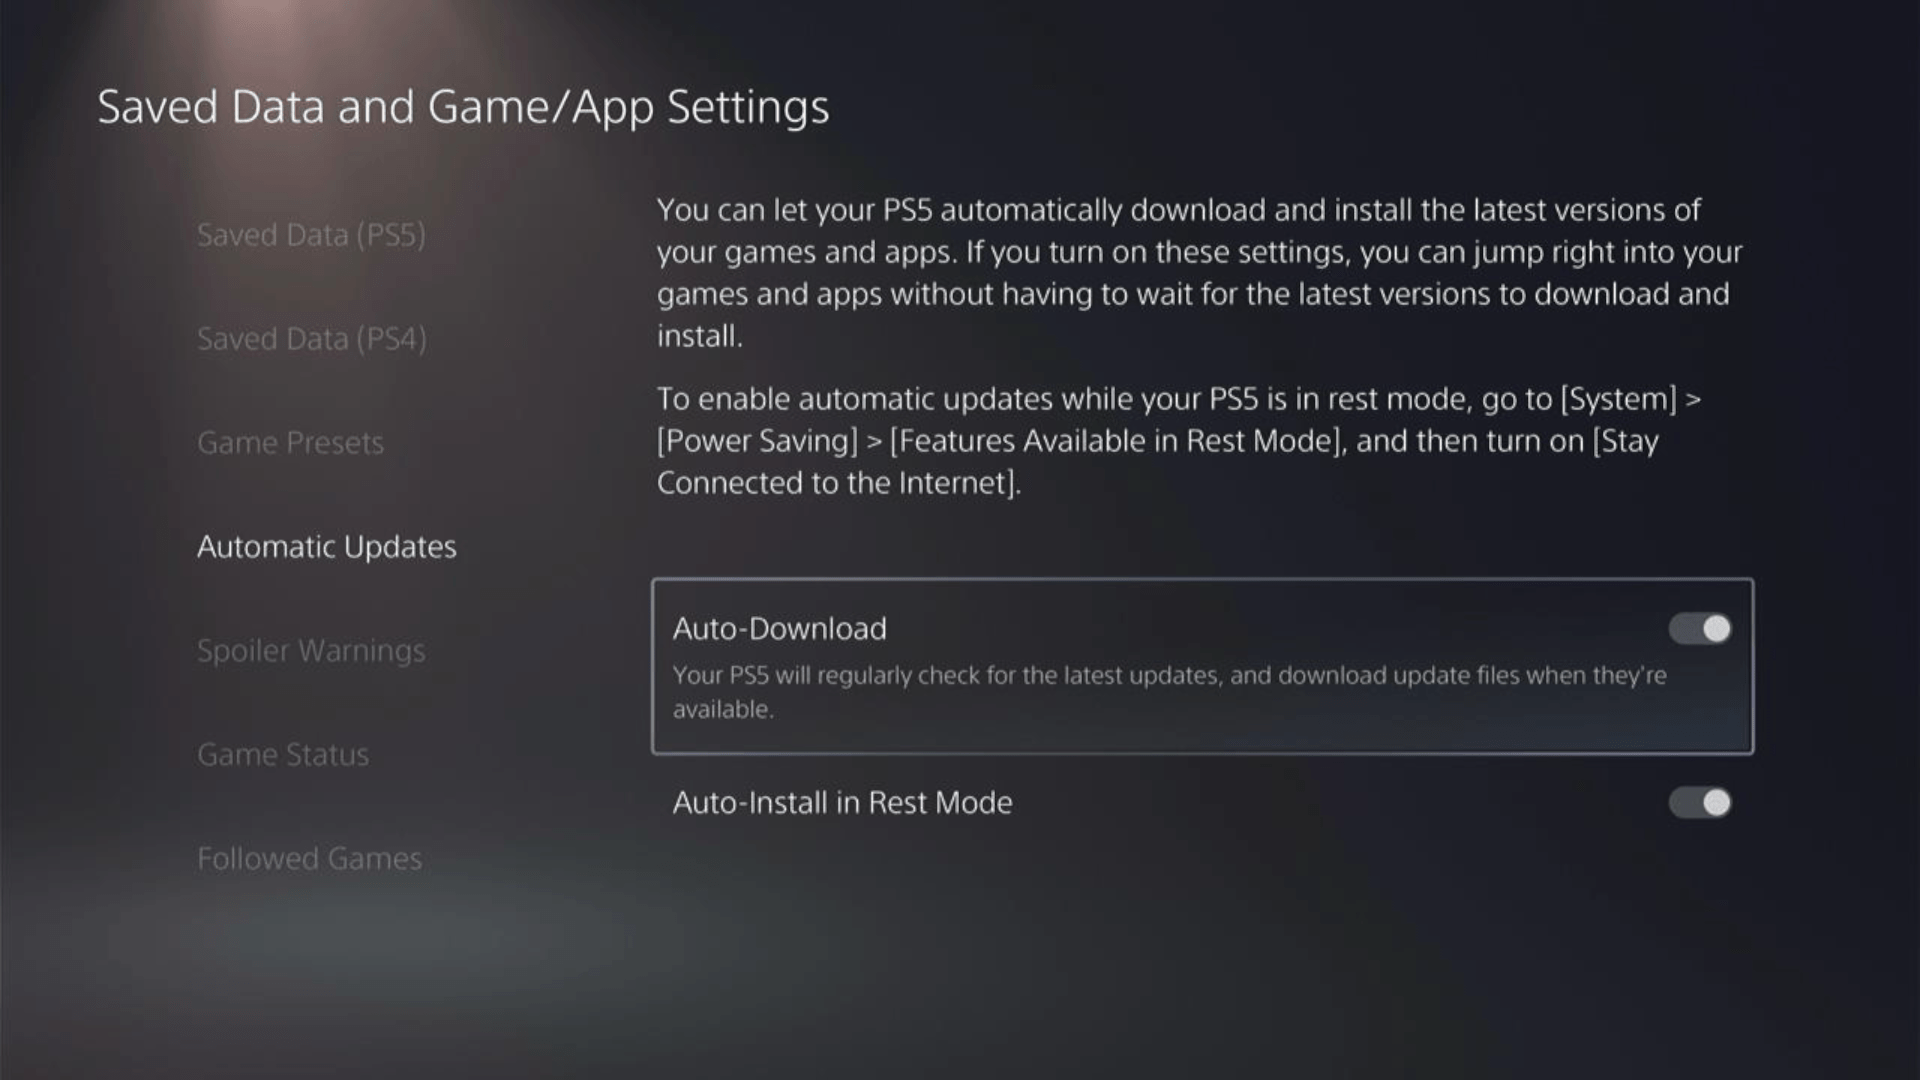 In the Saved Data and Game/App Settings window, select Automatic Updates from the left sidebar to enable automatic game updates to avoid Crashing issue